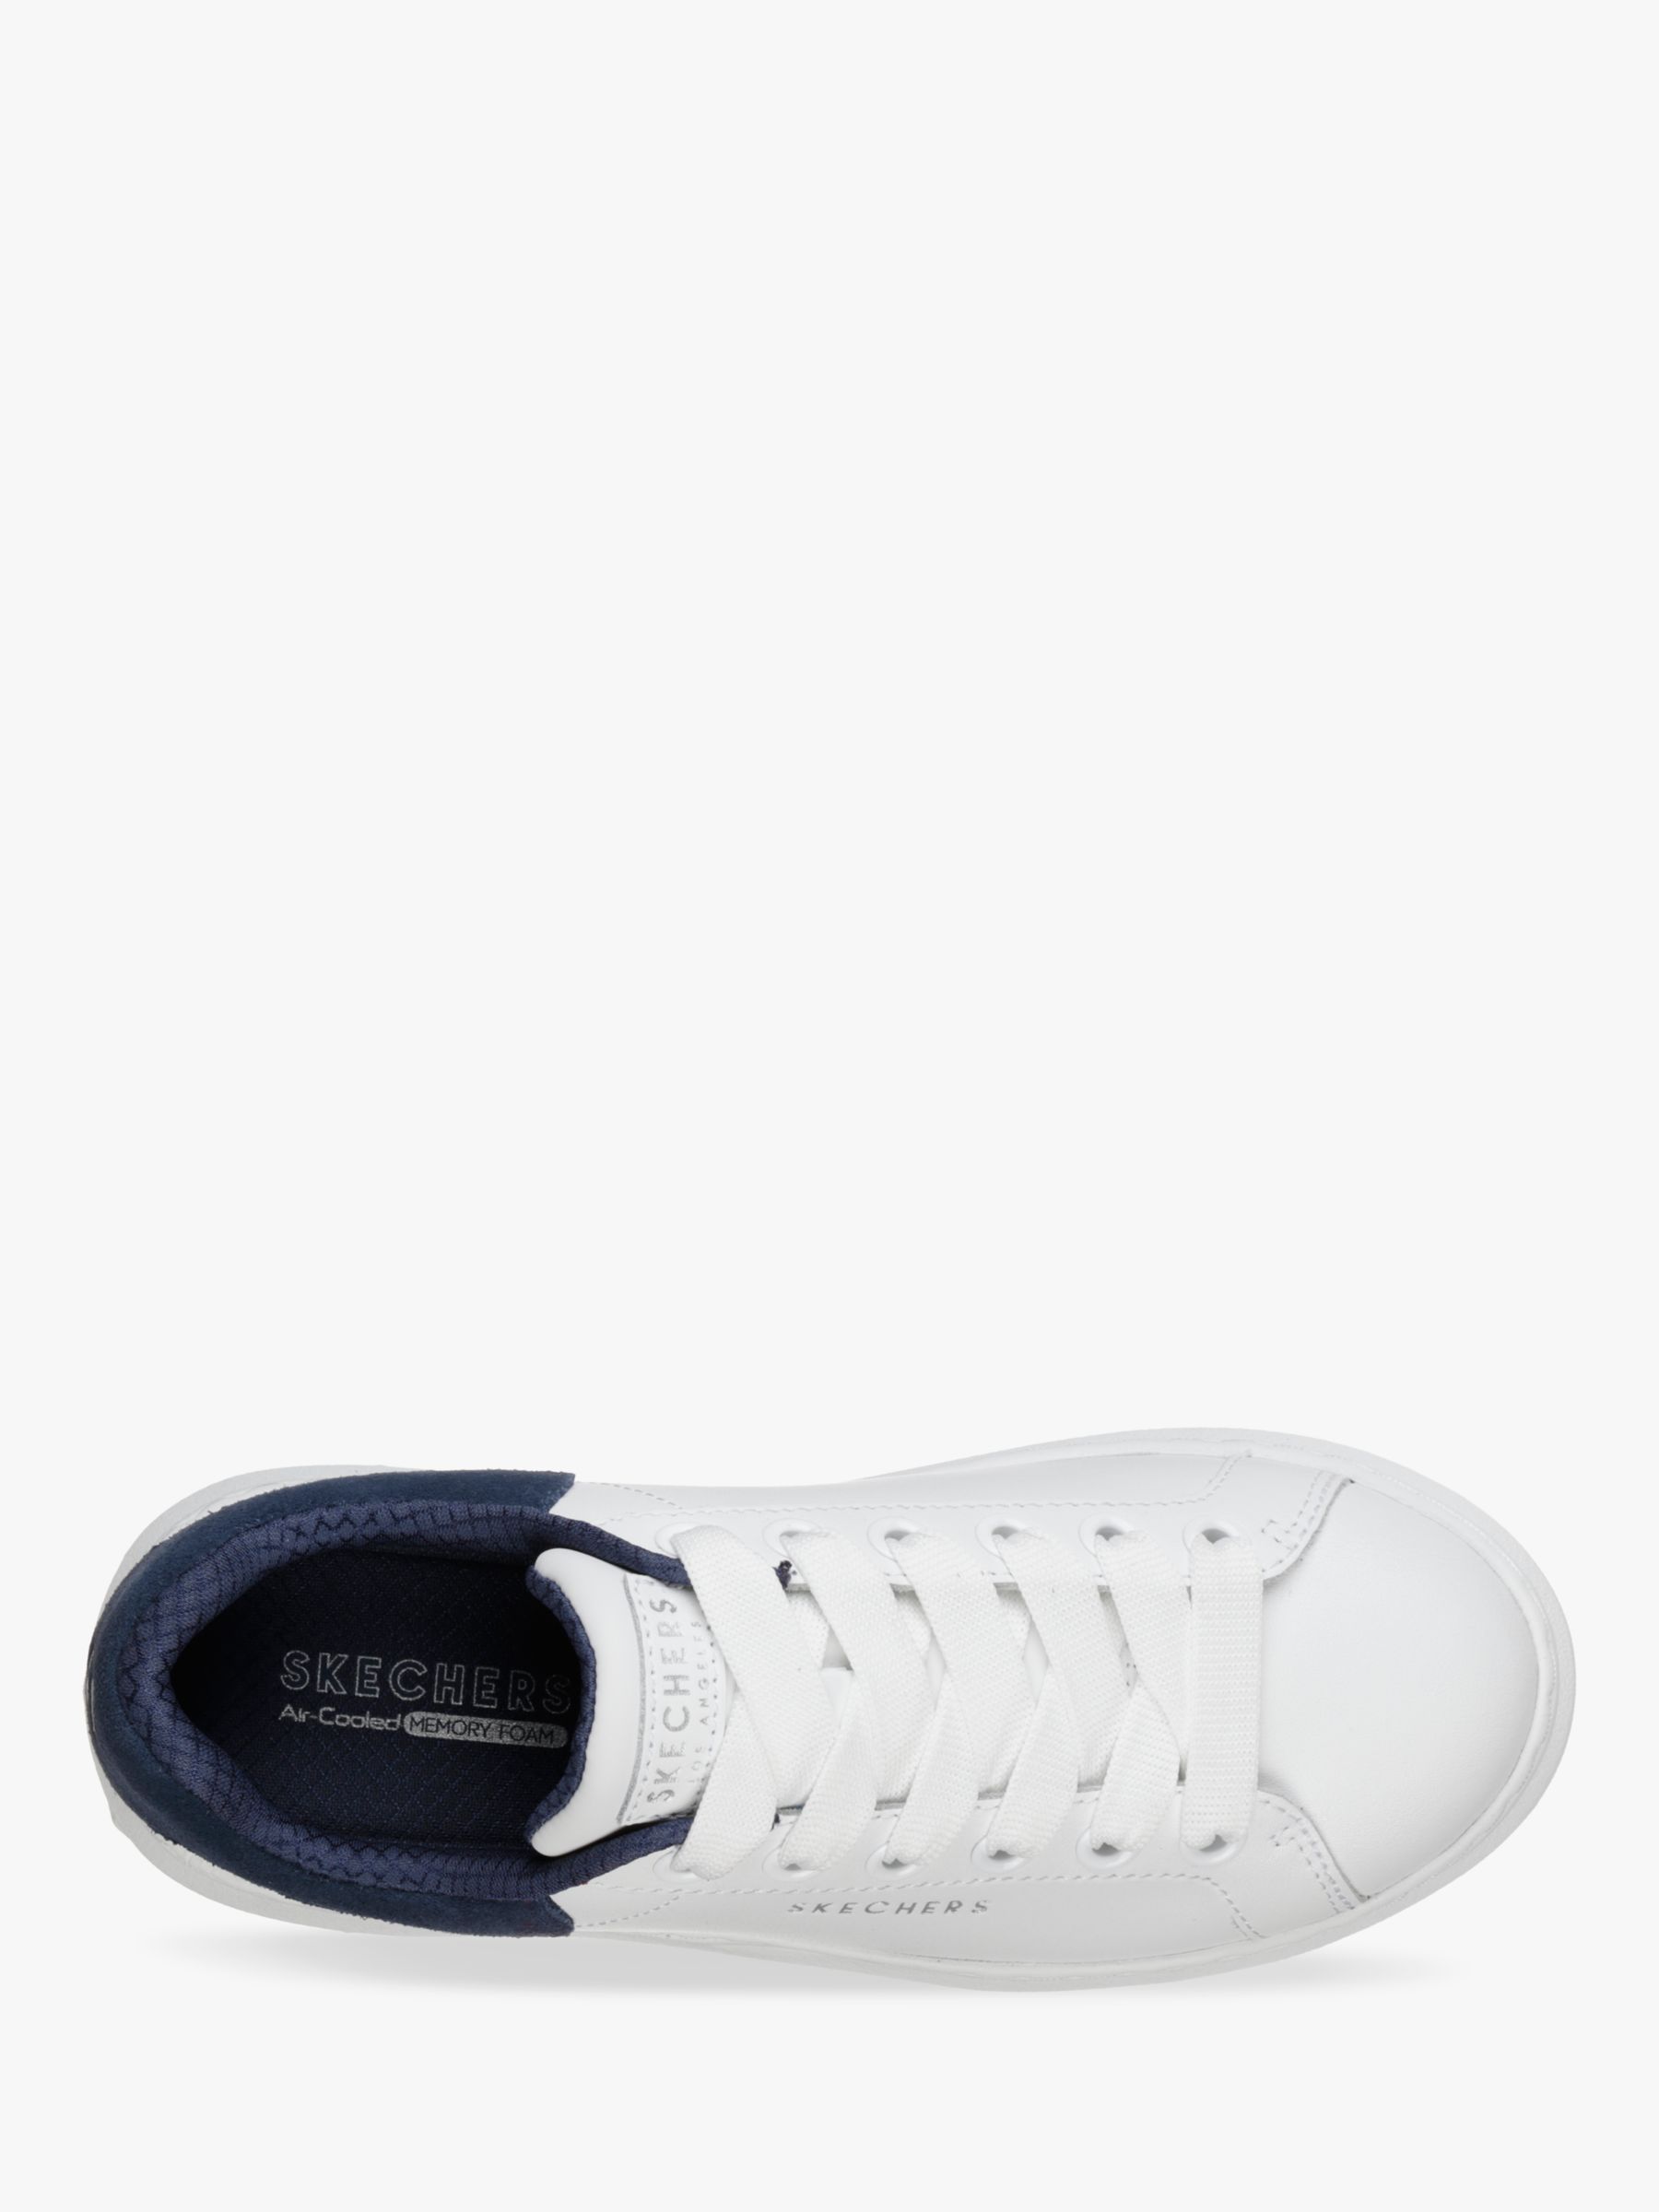 skechers leather lace up trainers